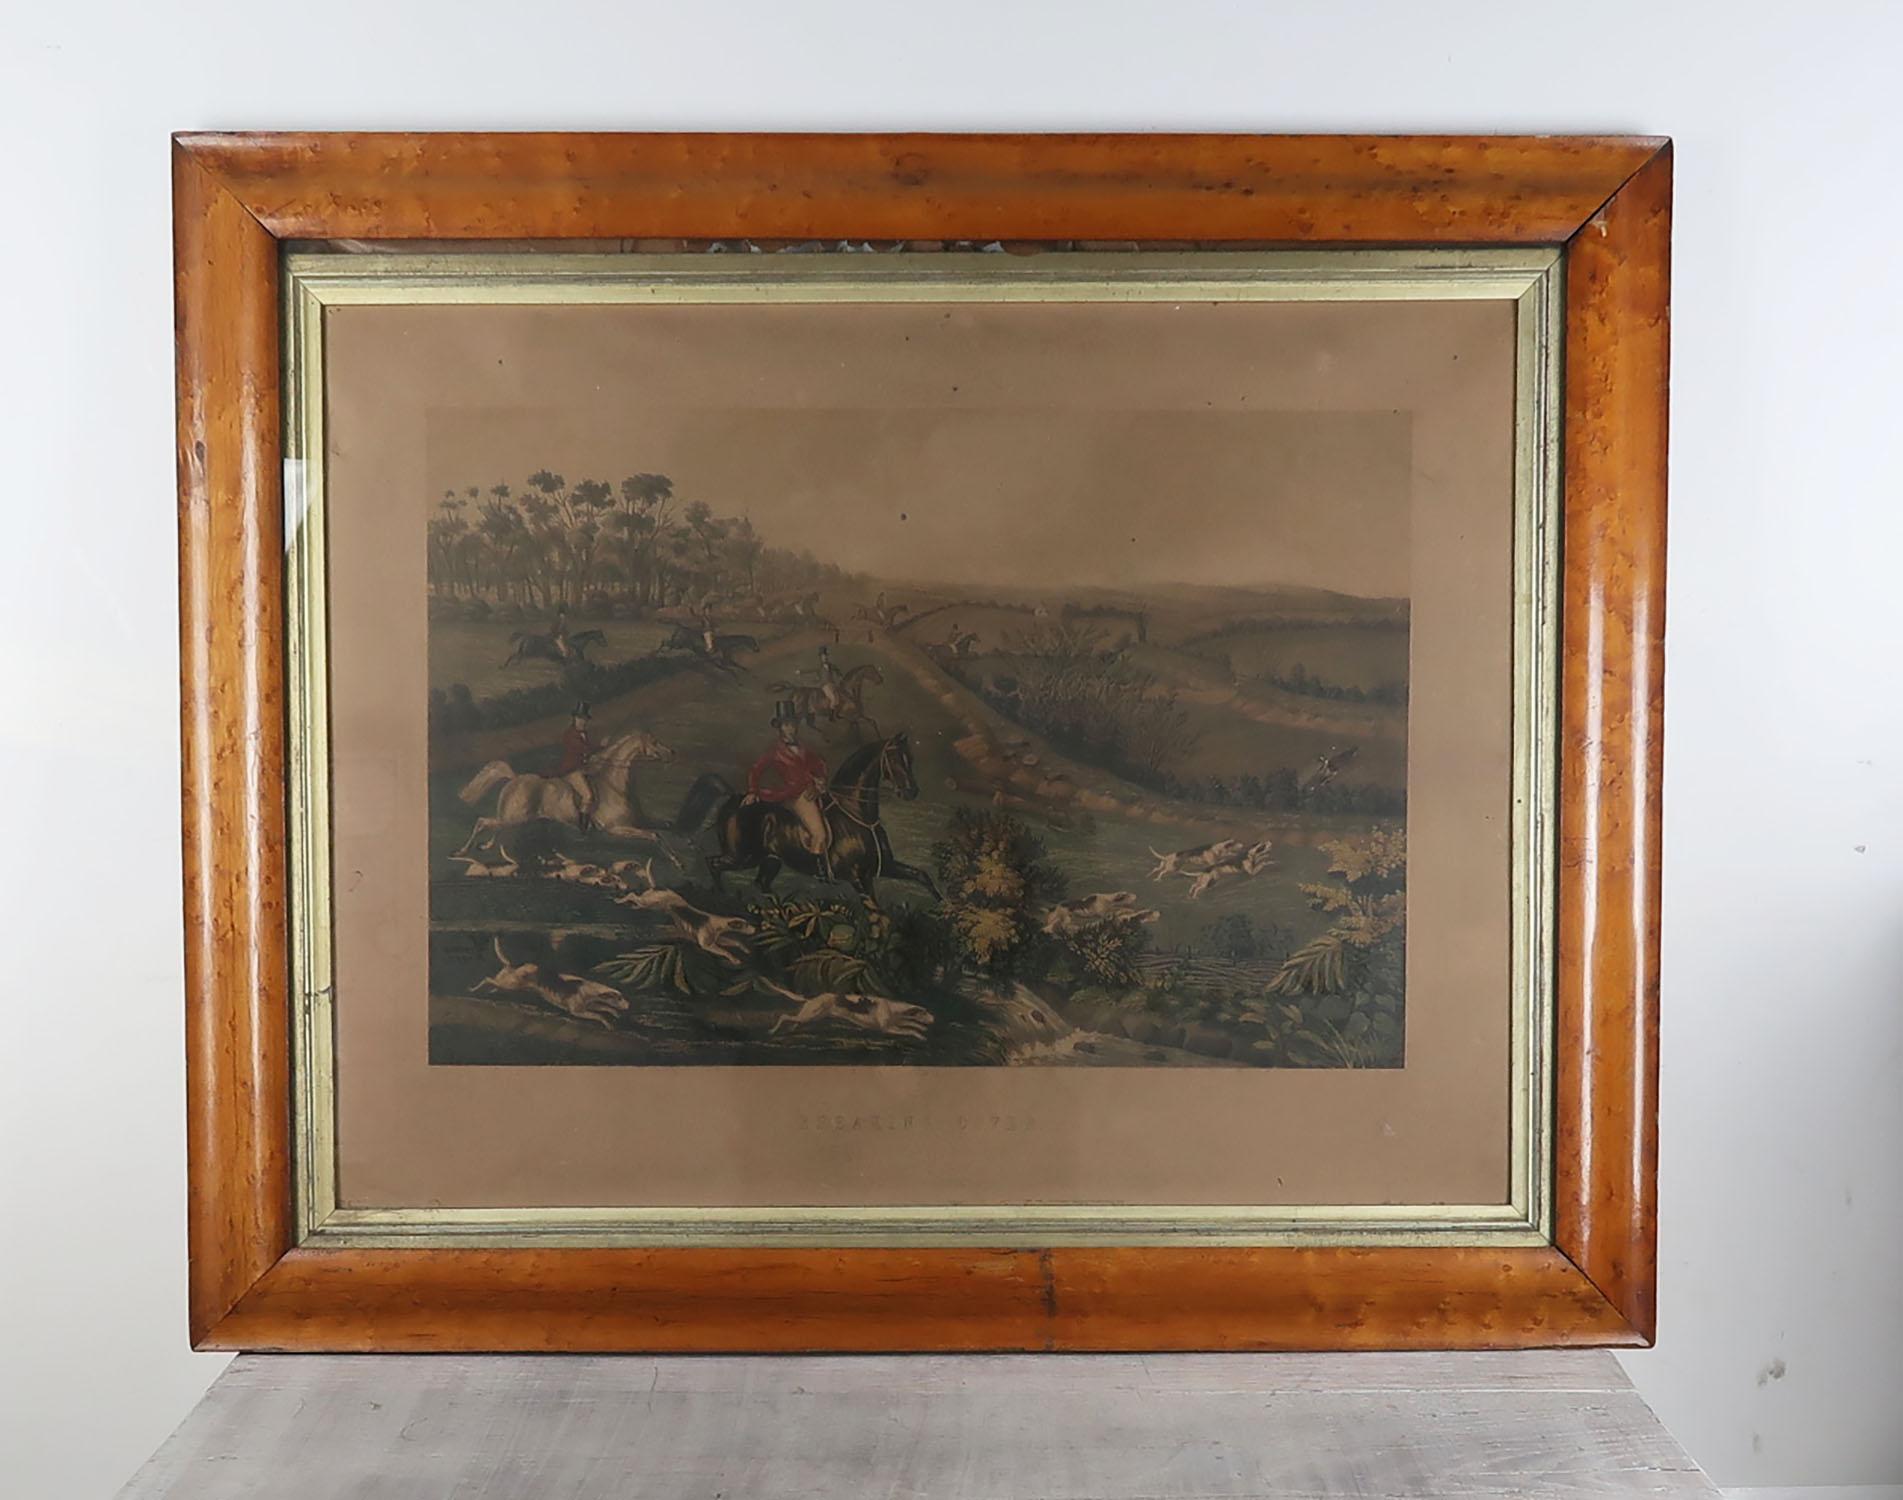 Amazing set of 4 sporting prints. All fox hunting related.

Country House condition

Wonderful muted colors.

In the original bird's-eye maple frames.

Lithographs with original color.

Published by F.Sala & Co., Berlin, Germany.

All condition